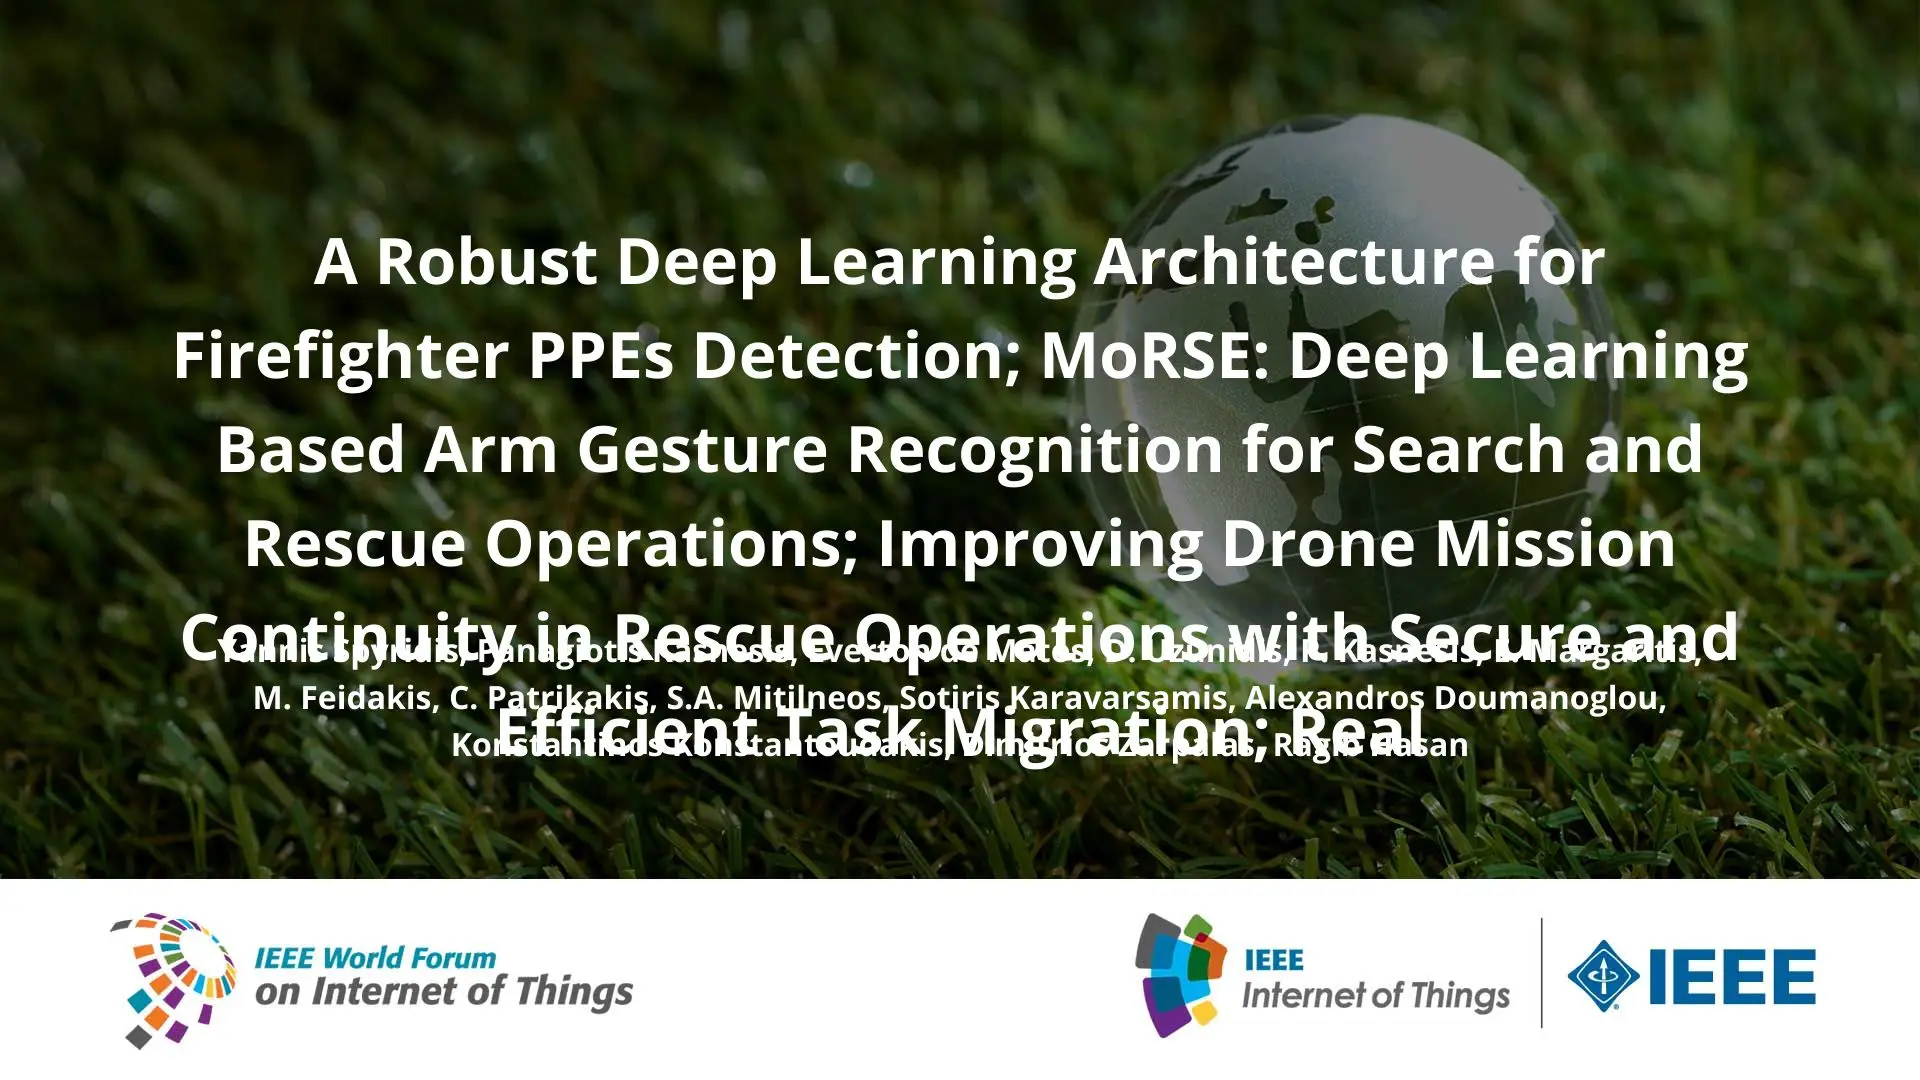 A Robust Deep Learning Architecture for Firefighter PPEs Detection; MoRSE: Deep Learning Based Arm Gesture Recognition for Search and Rescue Operations; Improving Drone Mission Continuity in Rescue Operations with Secure and Efficient Task Migration; Real